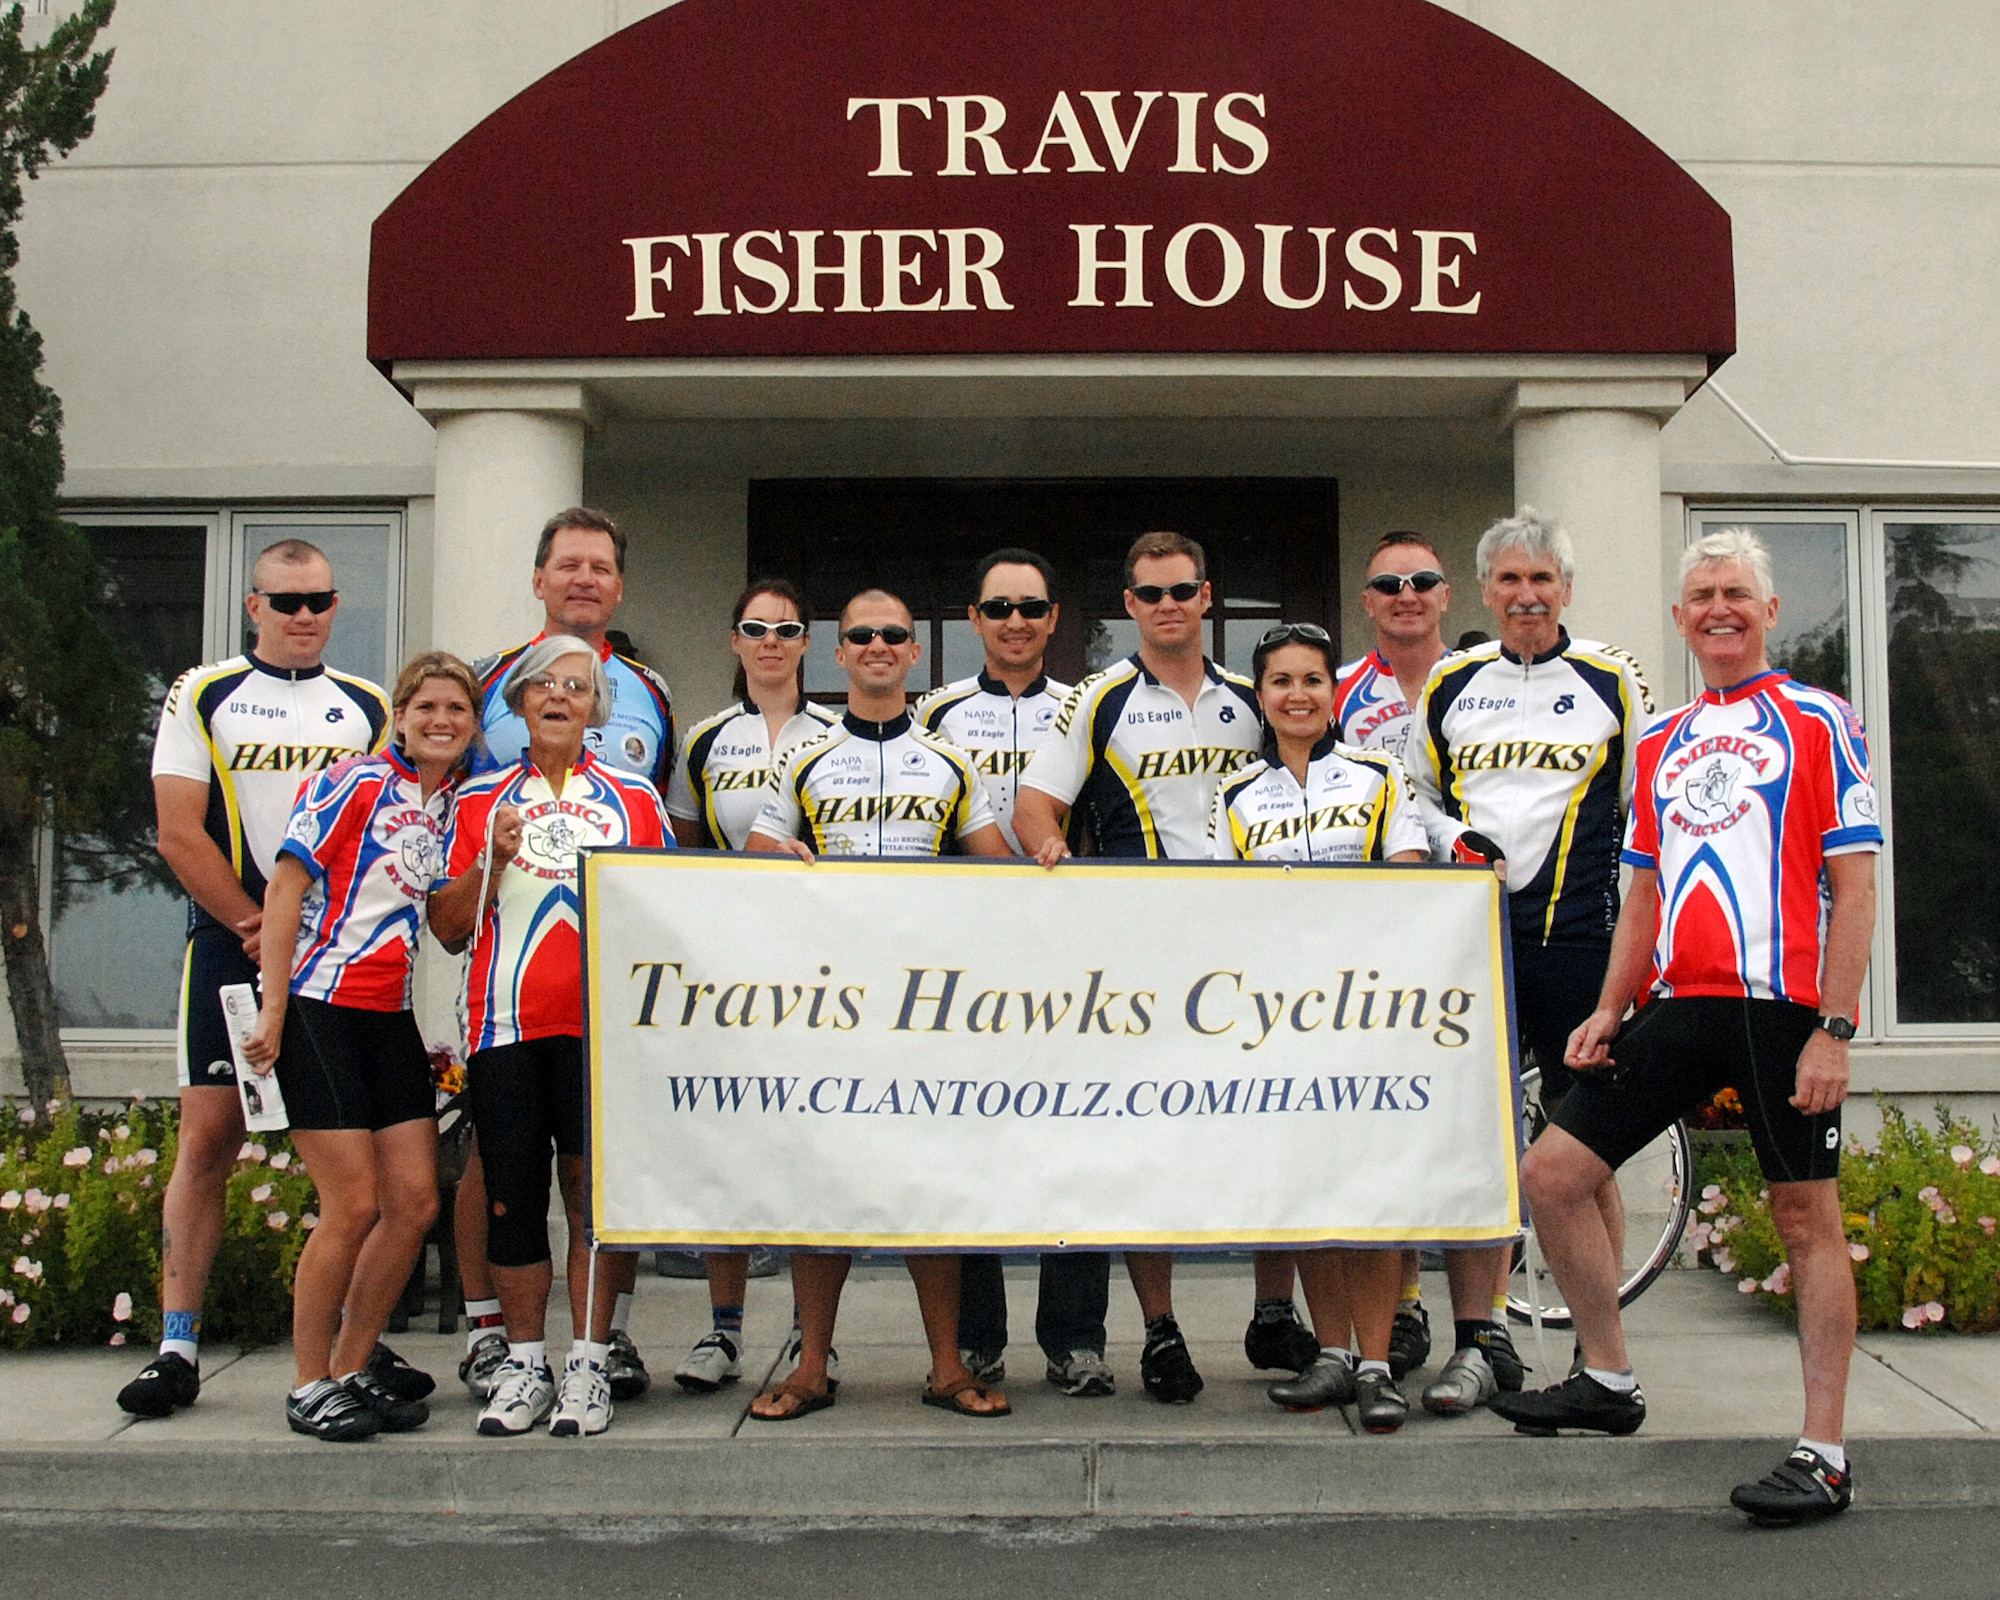 Mr. Robert K. Rodweller, pictured here (front, far right) in front of the Travis Air Force Base Fisher House, on the second day of his "2007 Bicycle America for Wounded Veterans" cross country bicycle ride. Pictured with Mr. Rodweller are several of his riding partners and members of the Travis Hawks Cycling Club. Mr. Rodweller departed from San Francisco on June 3 to begin a 4,000 mile bicycle ride across our great country. Fifty-two days later on July 25, he will end his ride at Portsmouth, New Hampshire. He is dedicating his ride to the men, women and families of the Armed Services of this country by raising funds for the Fisher House Foundation. (USAF Photo by David W. Cushman/DAFC)
